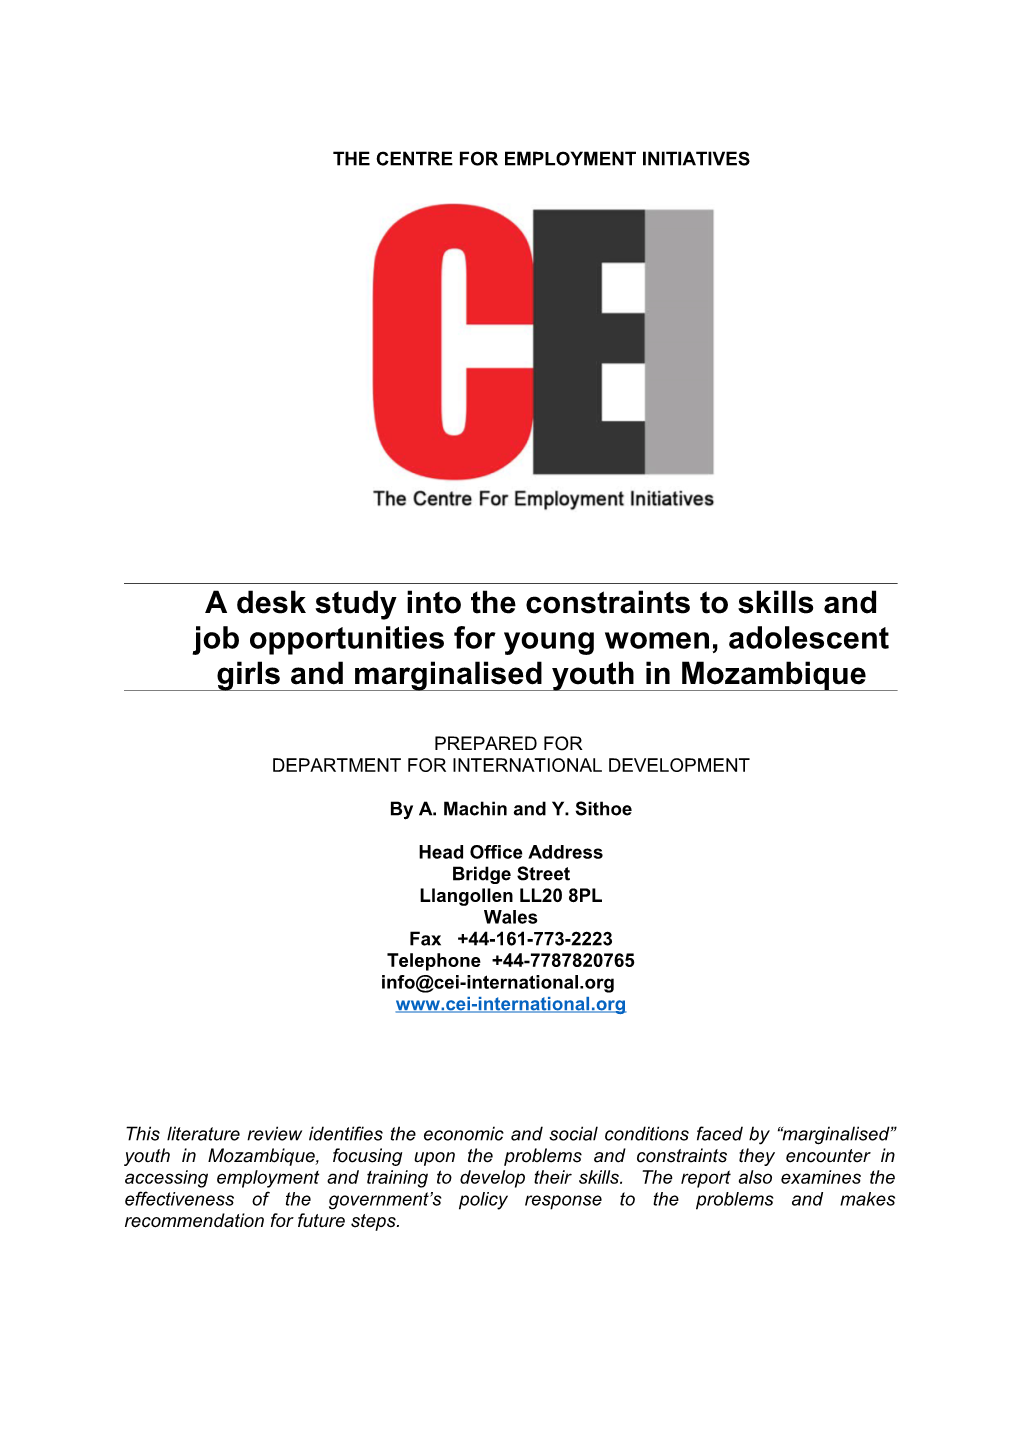 A Desk Study Into the Constraints to Skills and Job Opportunities for Young Women, Adolescent